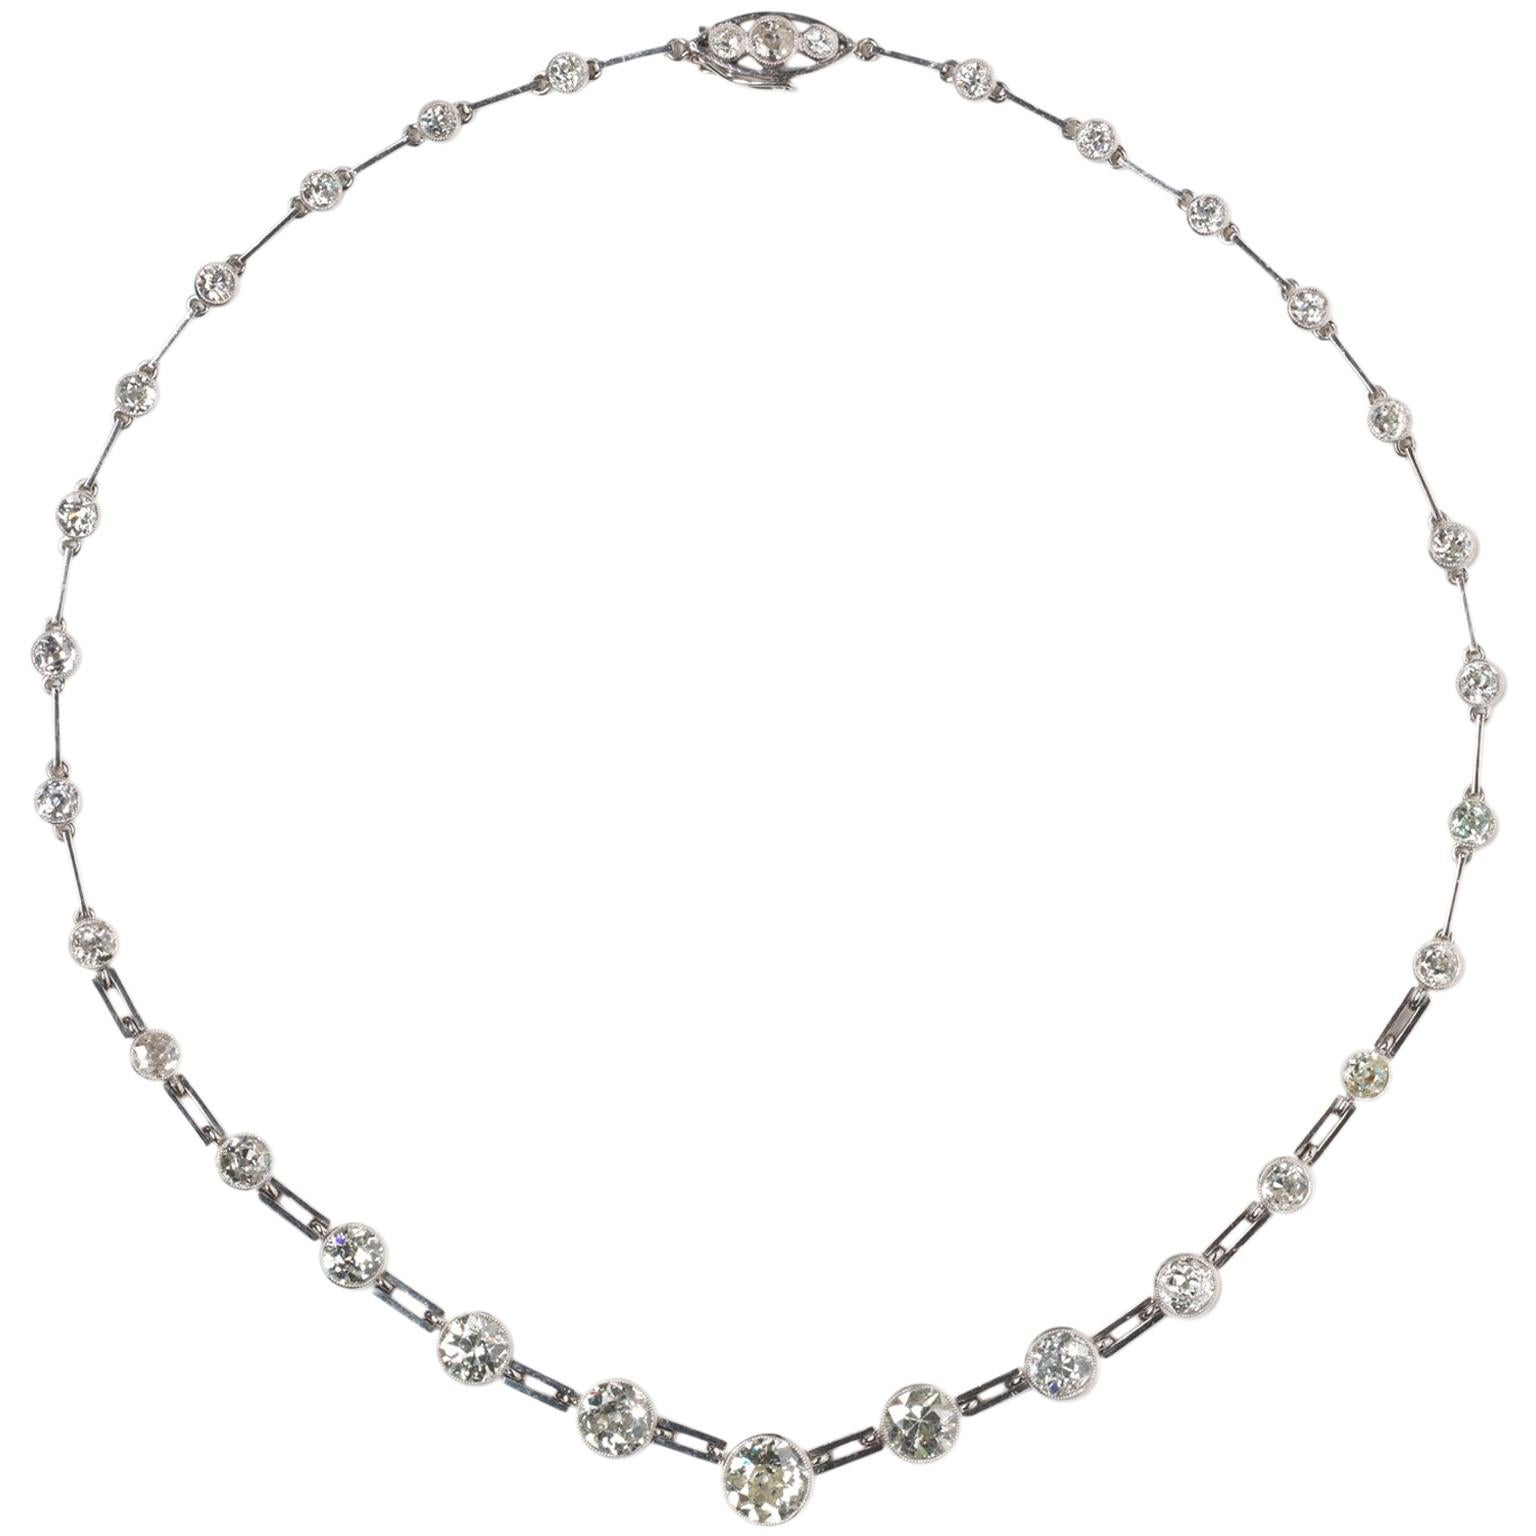 White Gold and Diamond Rivière Necklace